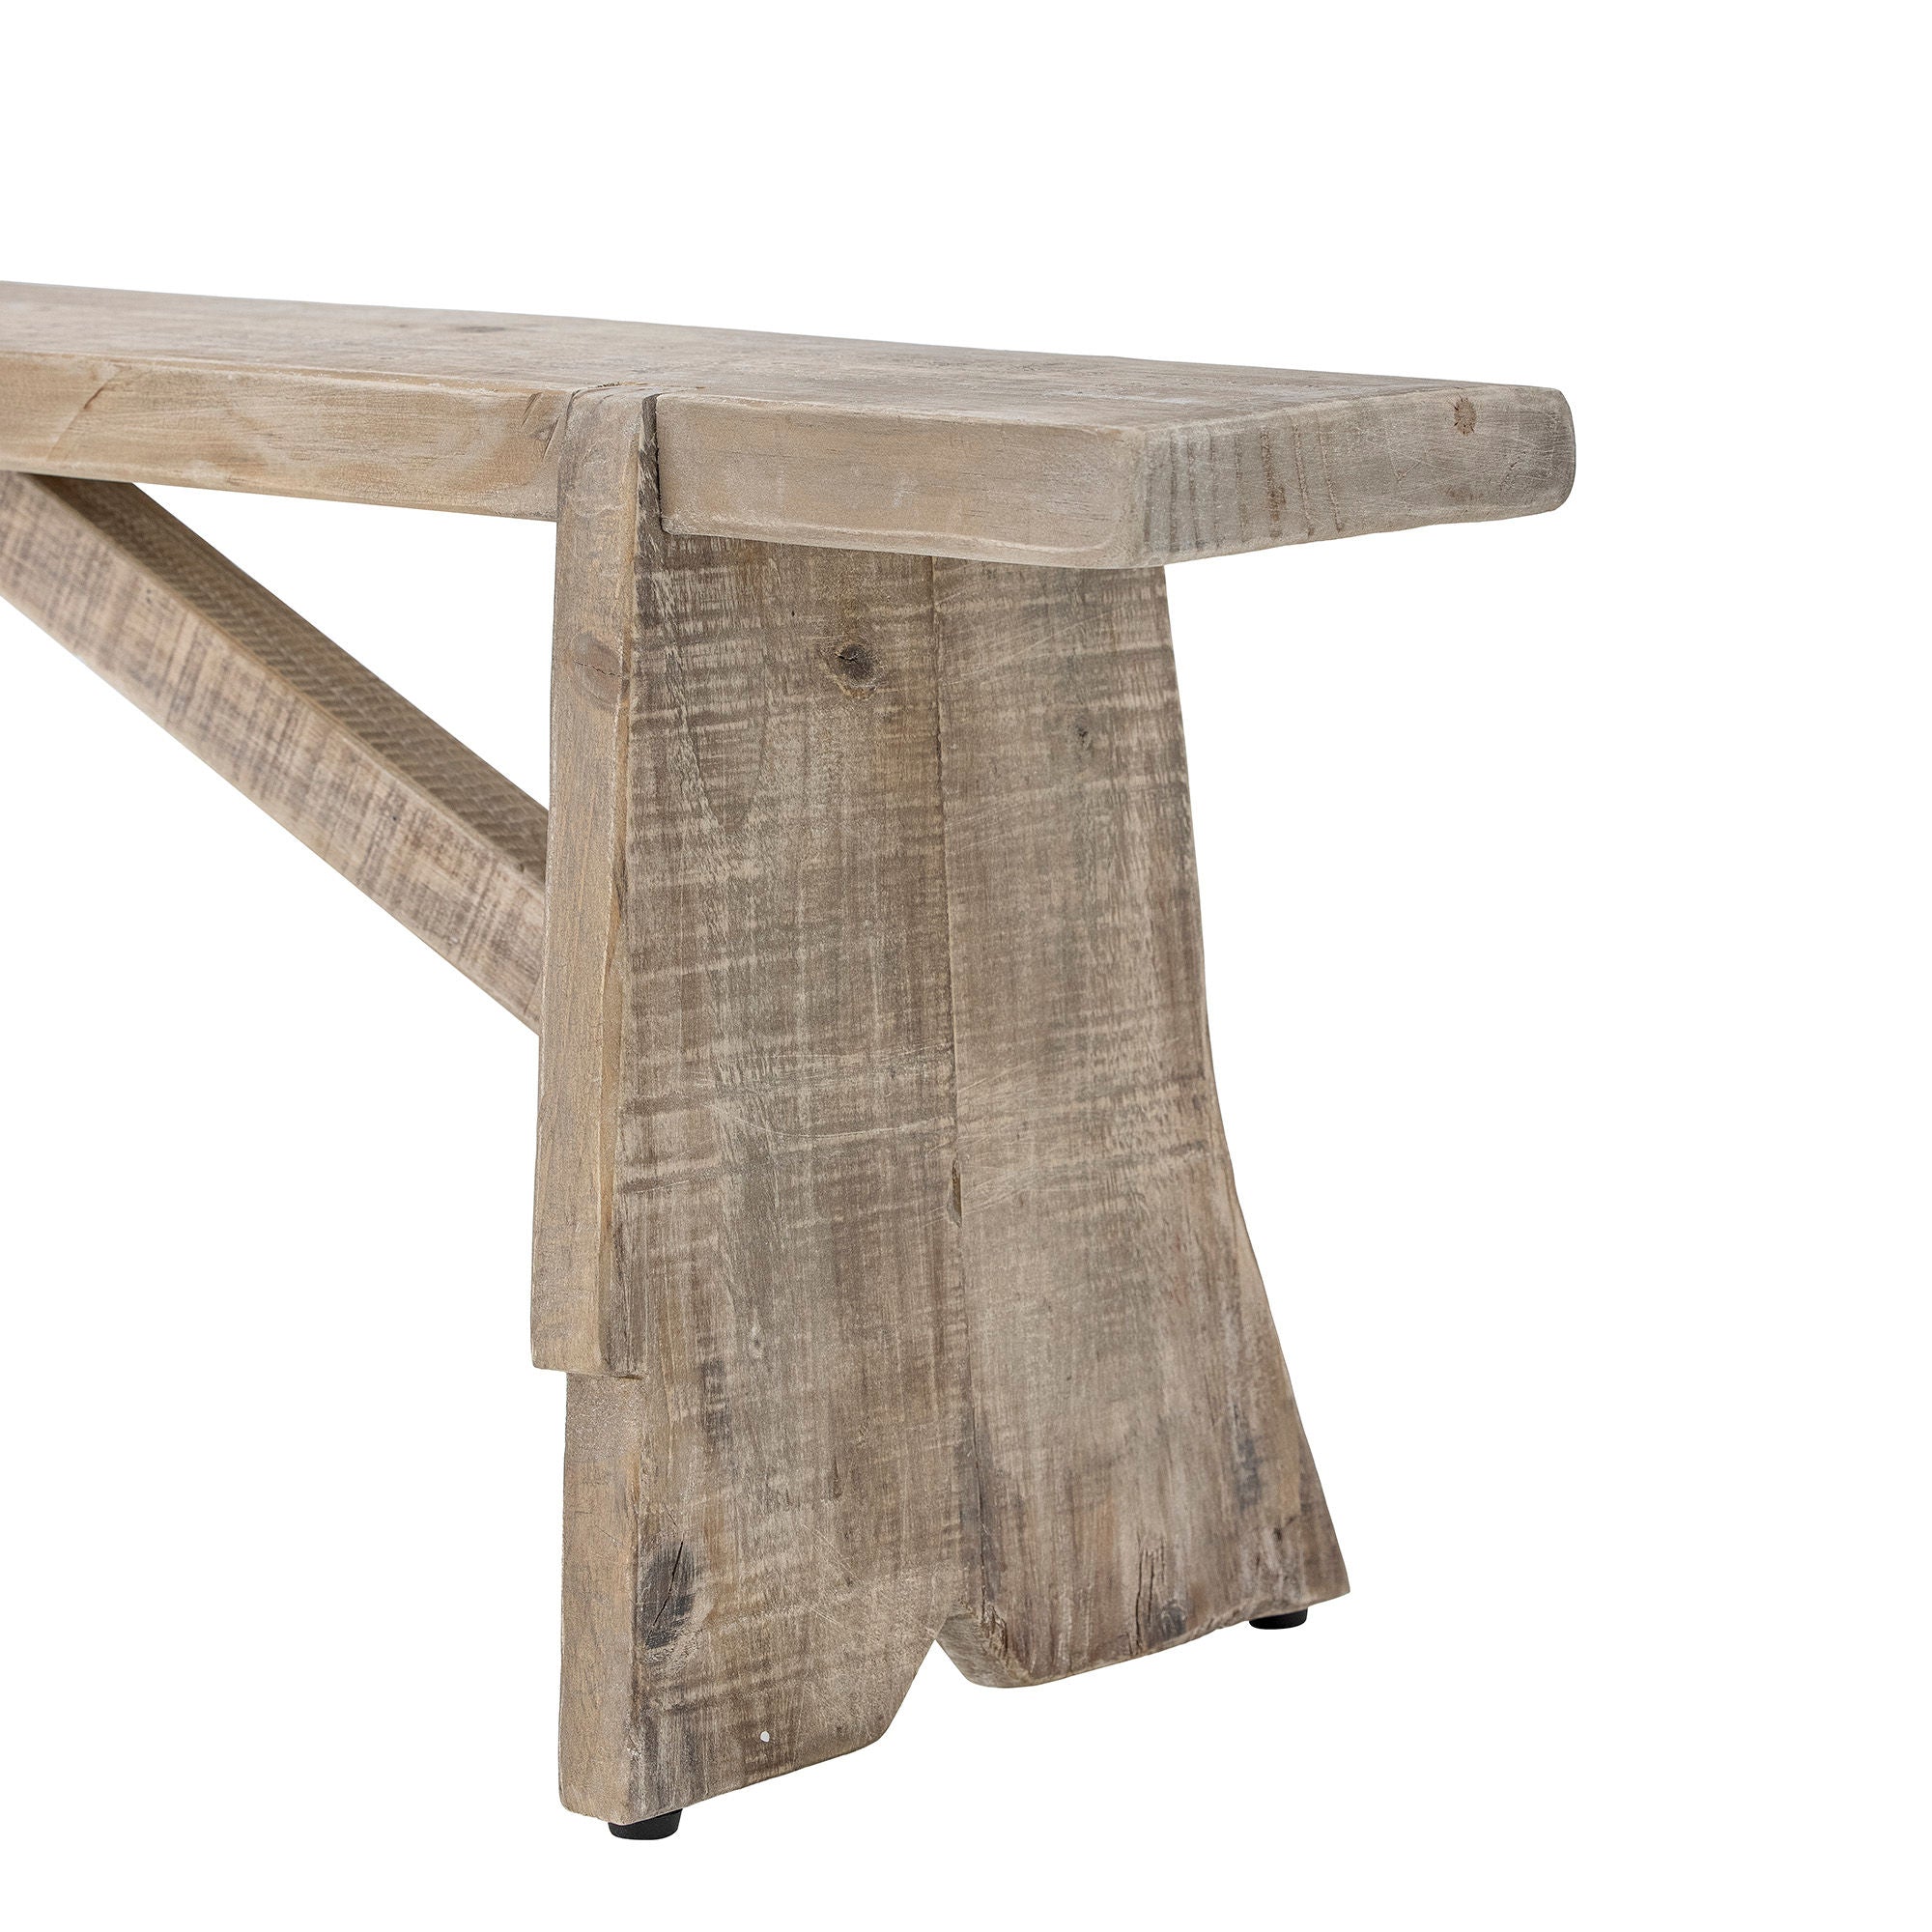 Bloomingville Glendale Bench, Nature, Reclaimed Pine Wood